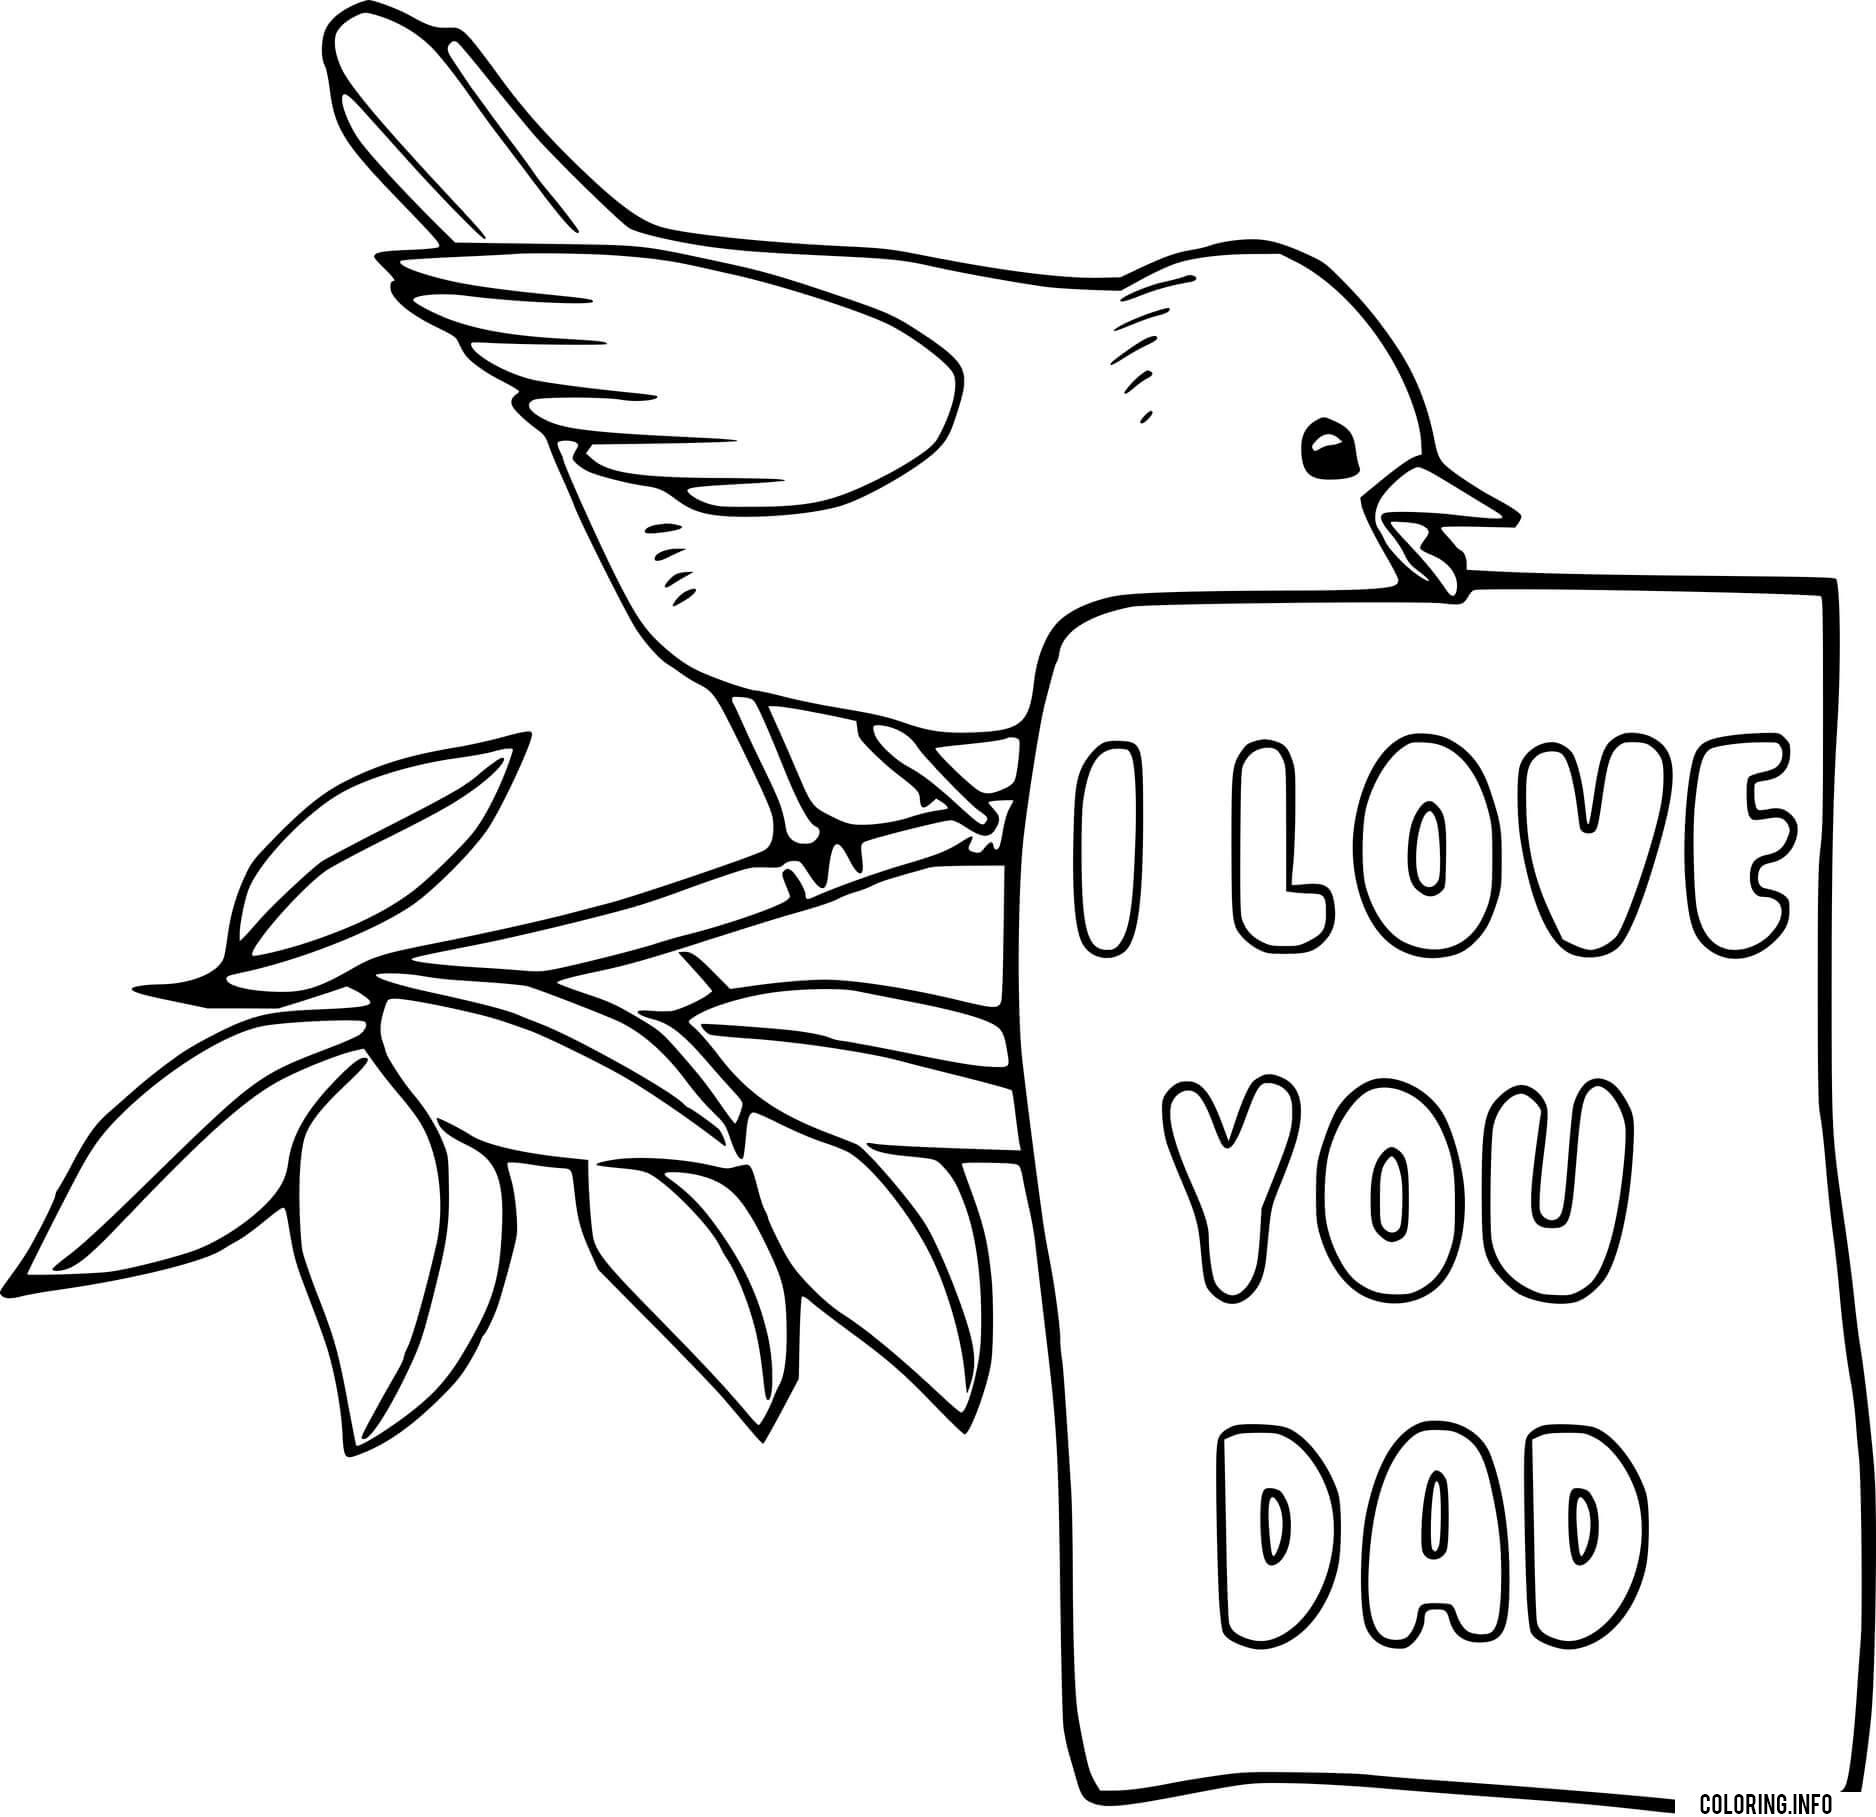 Bird Says I Love You Dad coloring